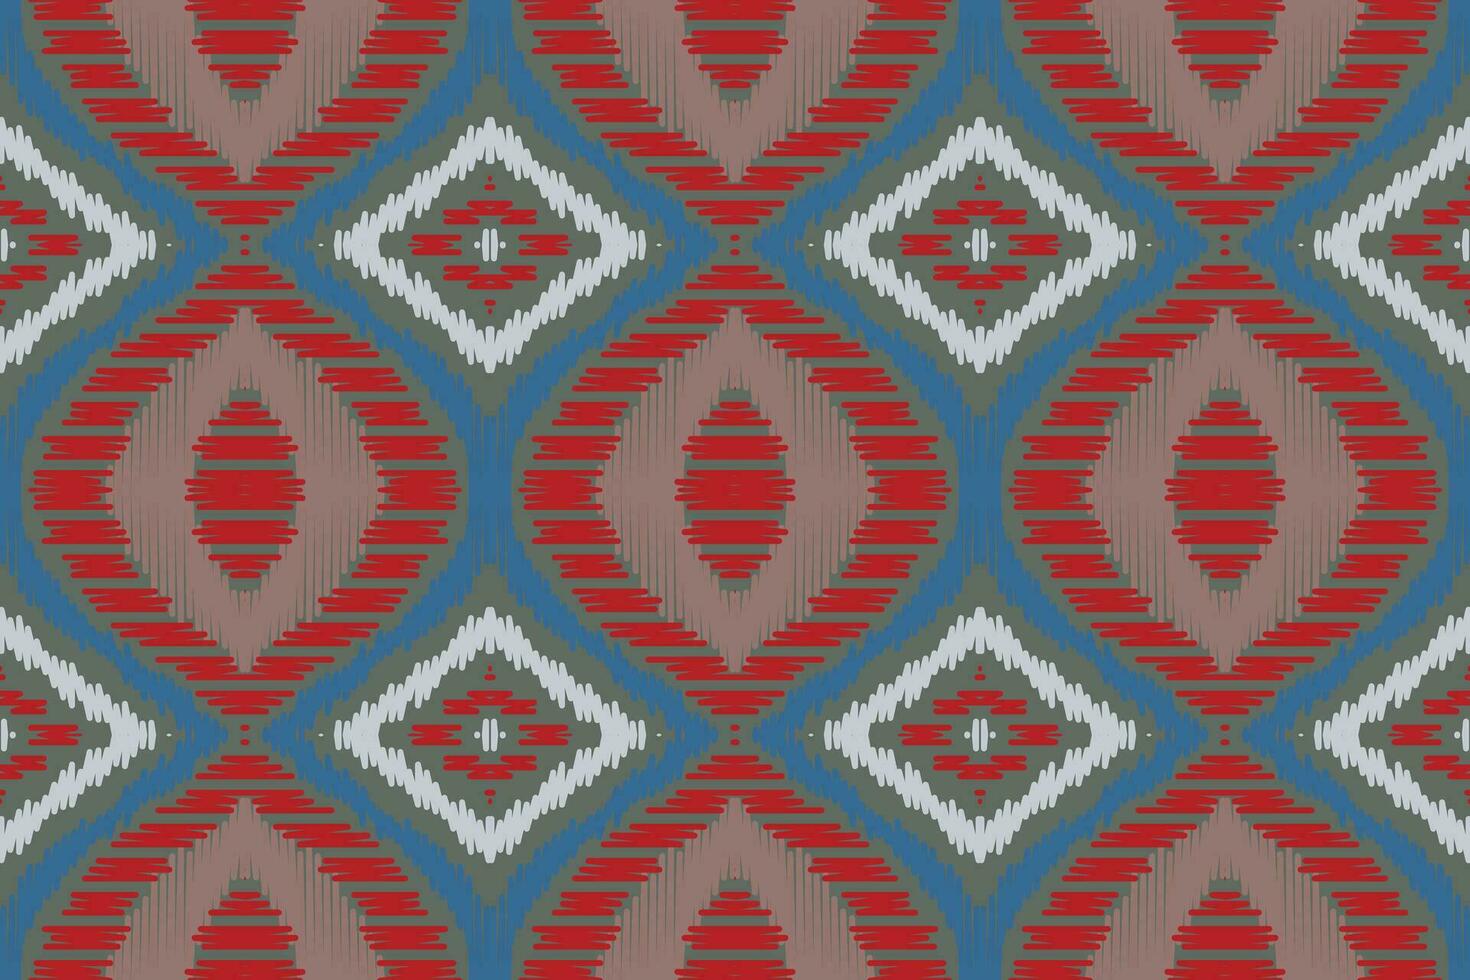 Ikat Damask Embroidery Background. Ikat Pattern Geometric Ethnic Oriental Pattern Traditional. Ikat Aztec Style Abstract Design for Print Texture,fabric,saree,sari,carpet. vector